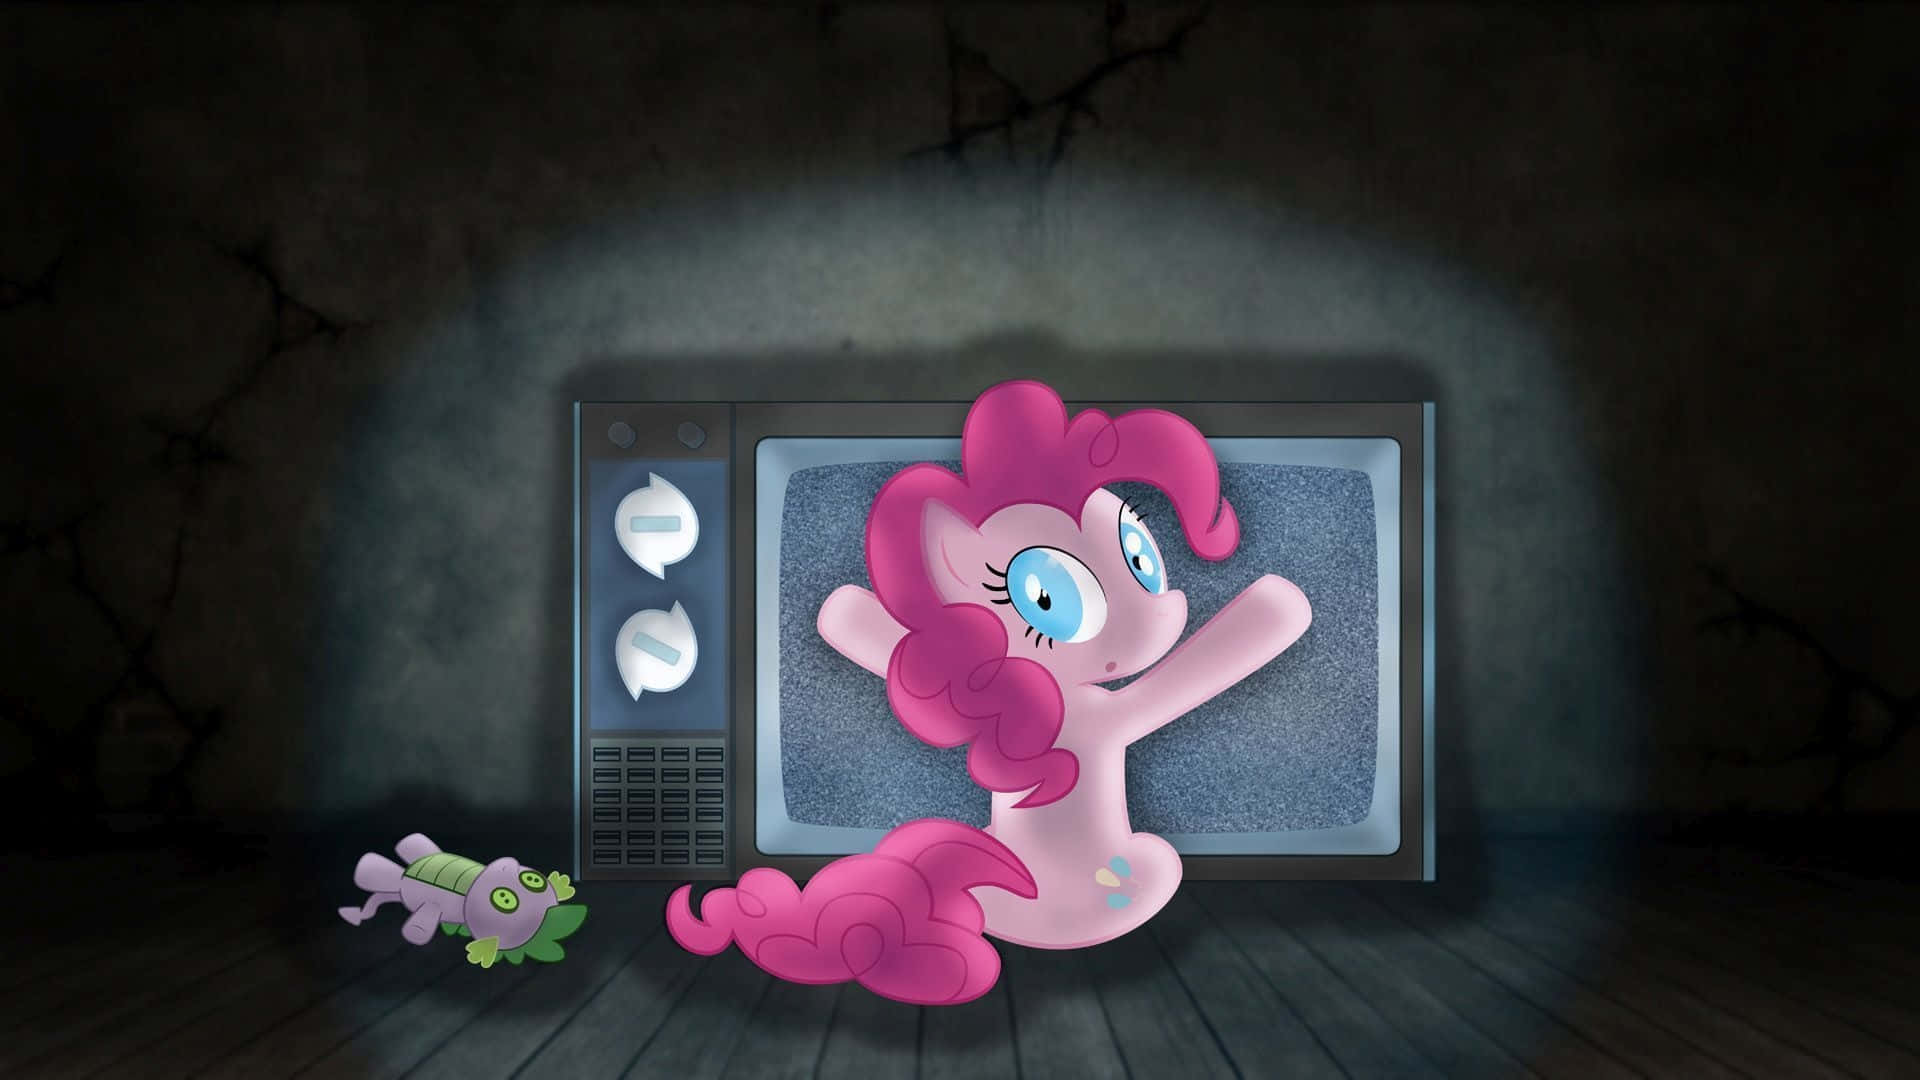 Pinkie Pie - The ultimate source of happiness and joy